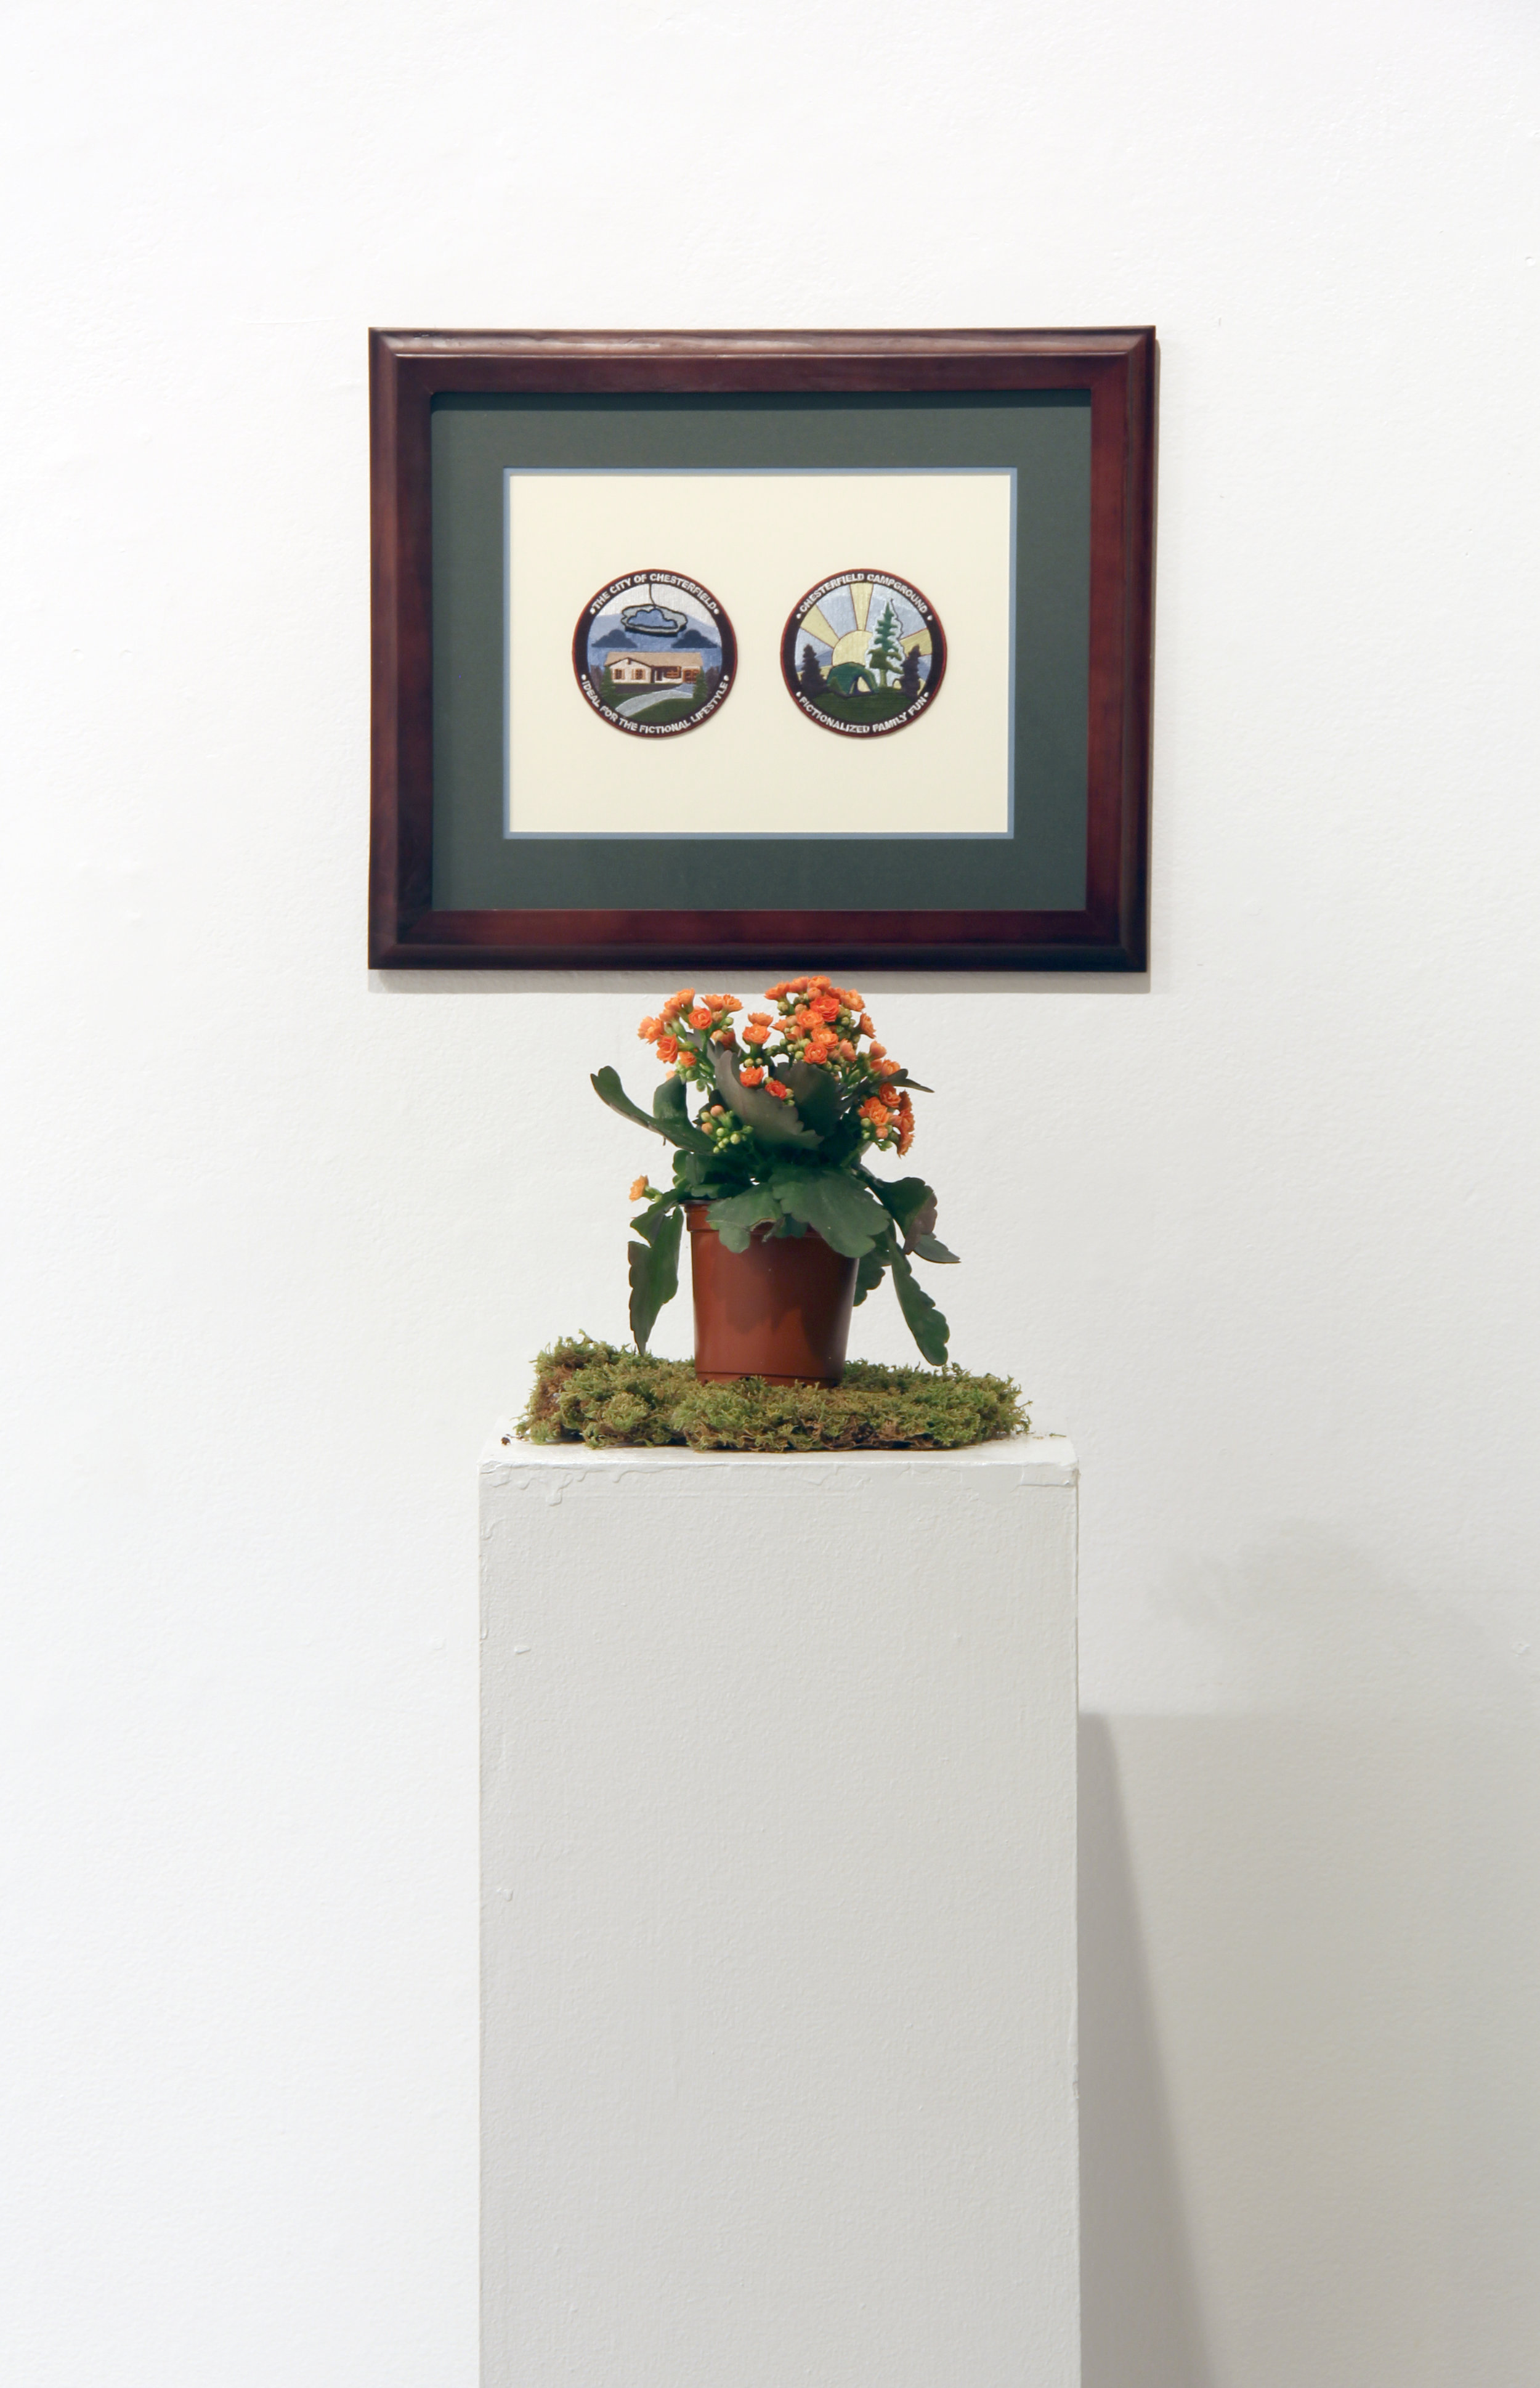 'Welcome to Chesterfield' at Anna Leonowens Gallery (2012)